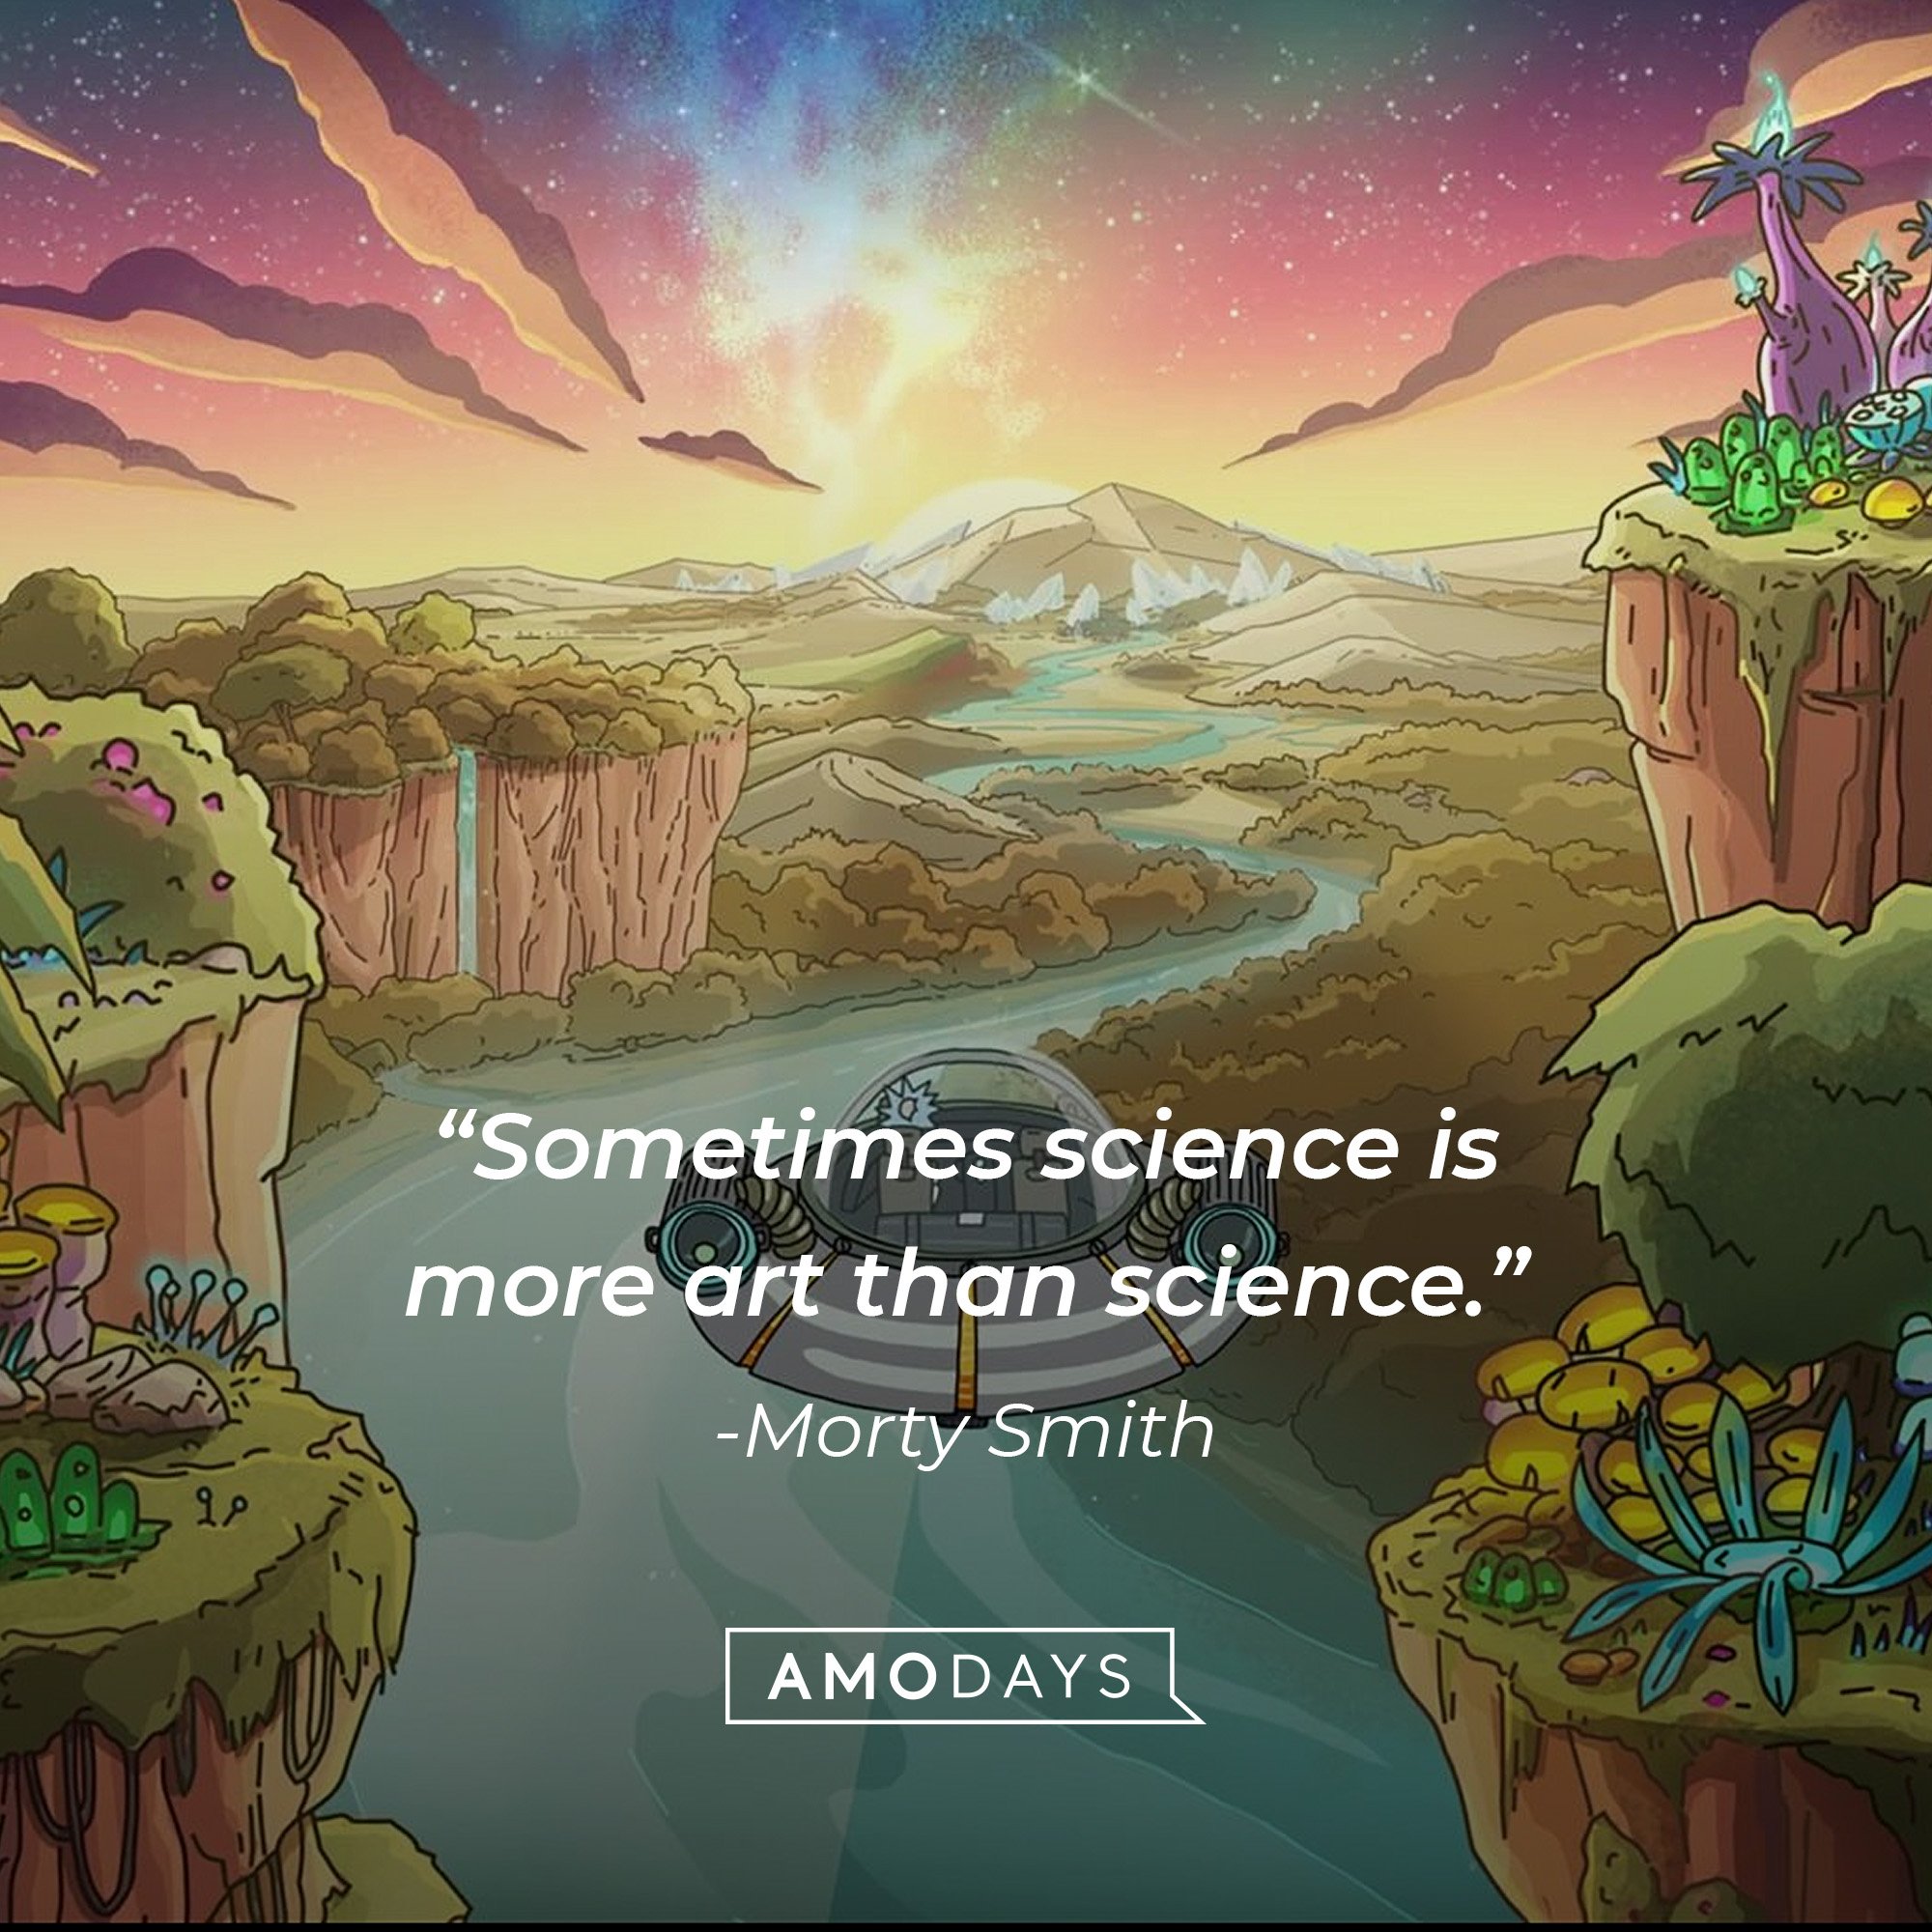 Rick Sanchez's quote: “Sometimes science is more art than science.”  | Image: AmoDays